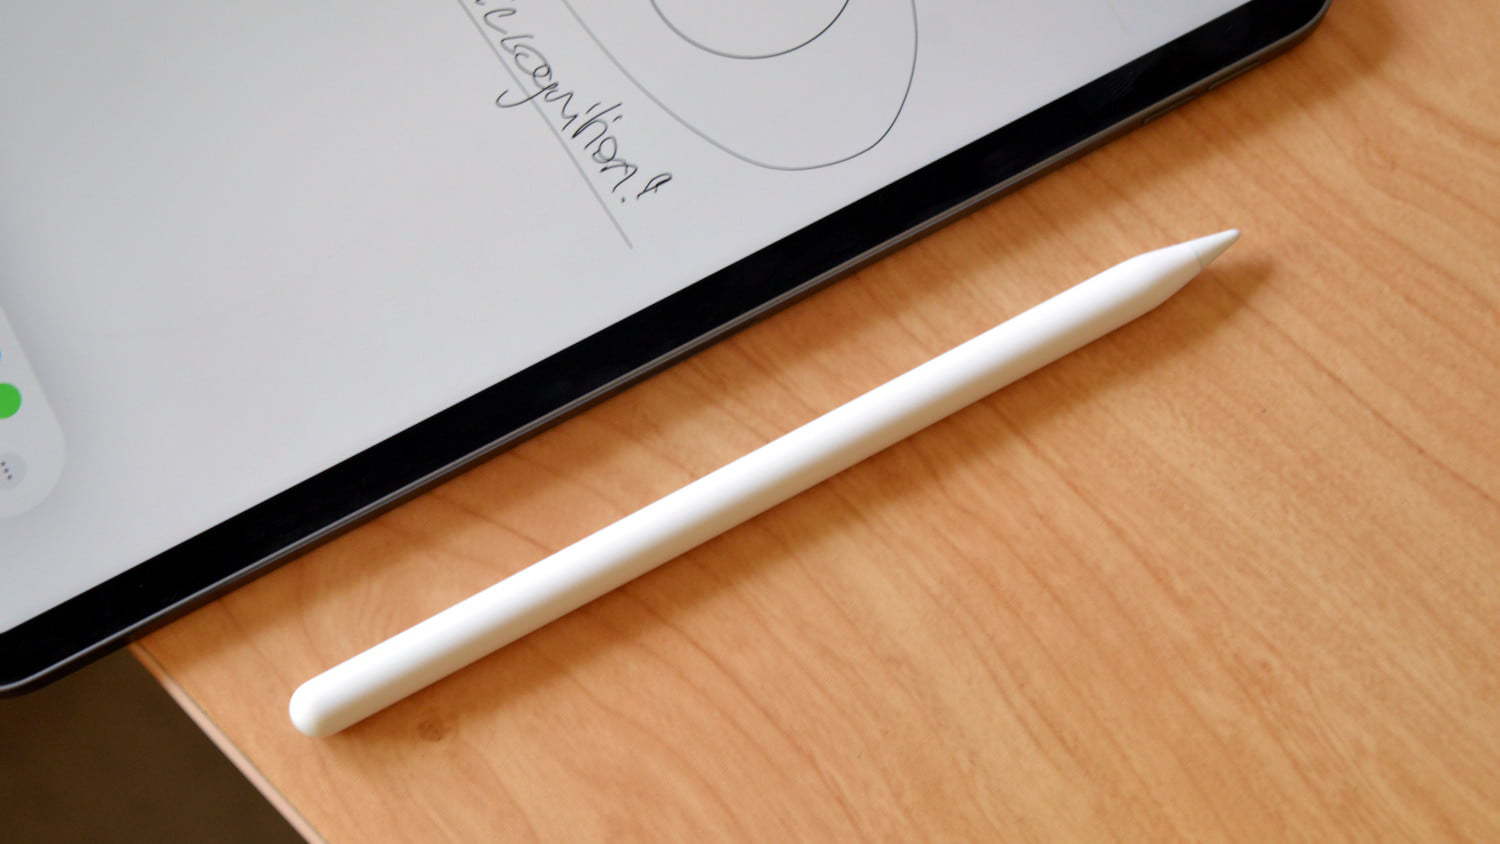 Here's how to connect Apple Pencil to iPad in a couple of easy steps